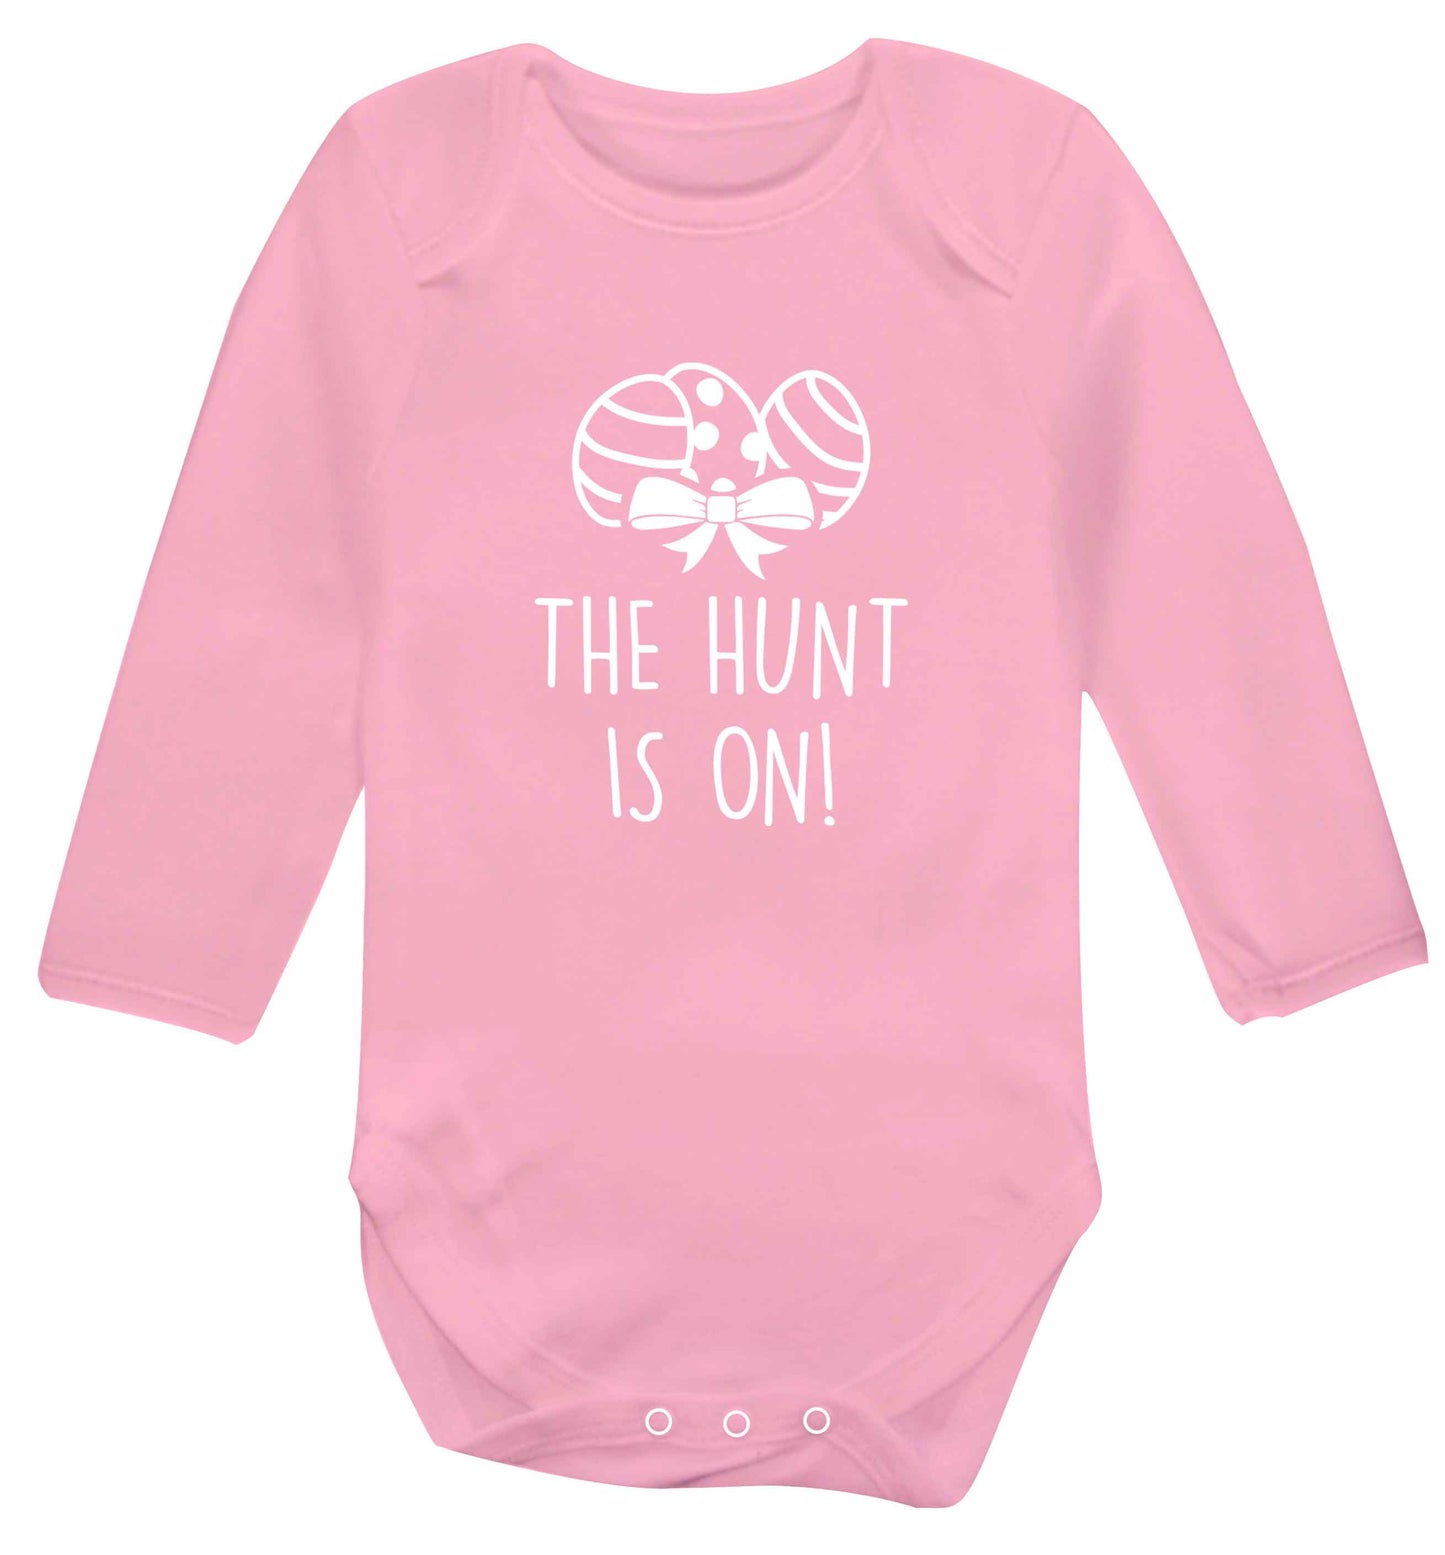 The hunt is on baby vest long sleeved pale pink 6-12 months